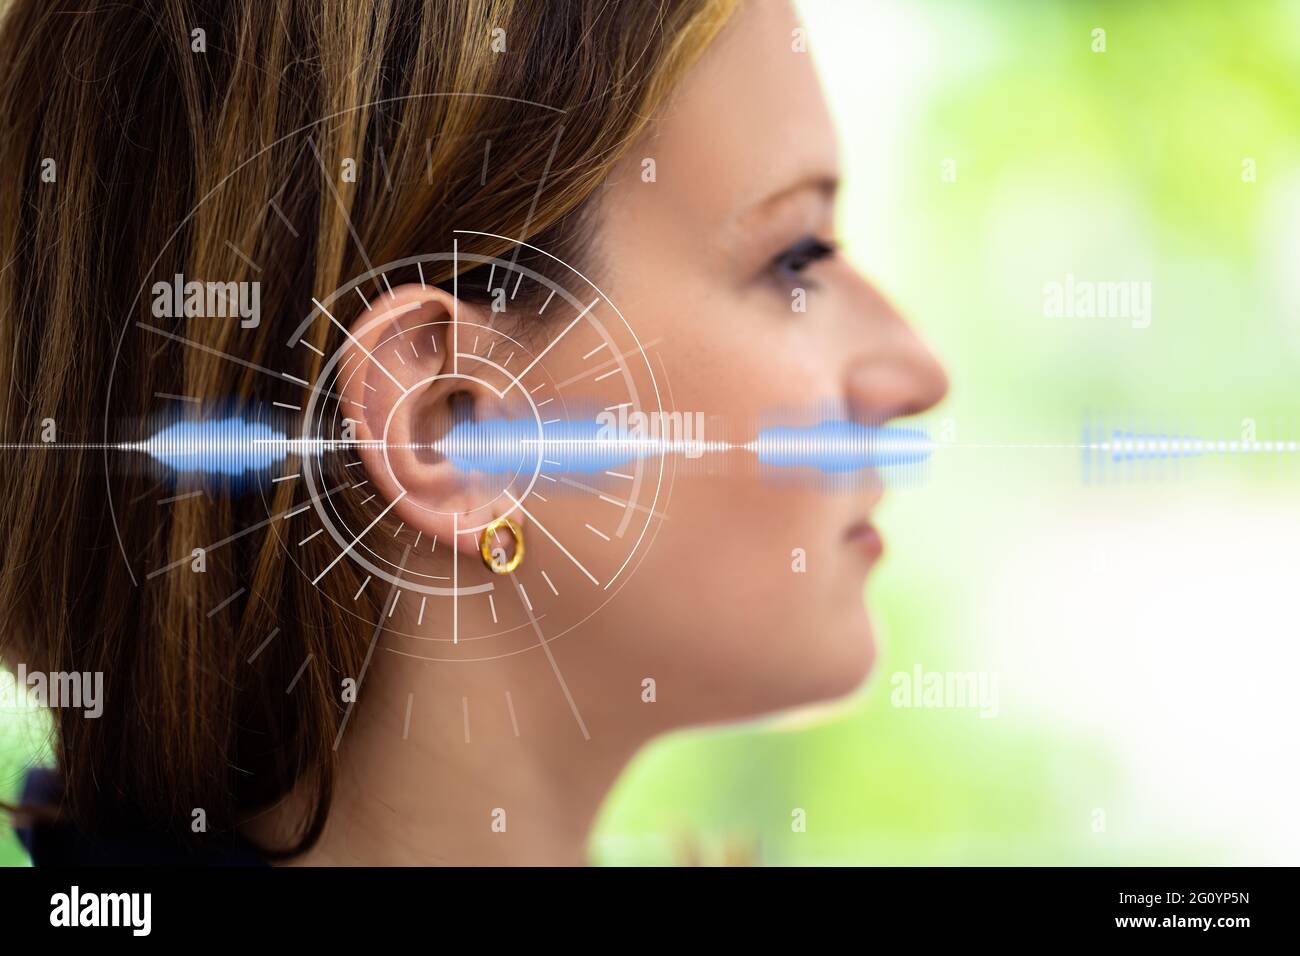 Hearing Aid And Deaf Care. Ear Photo Stock Photo